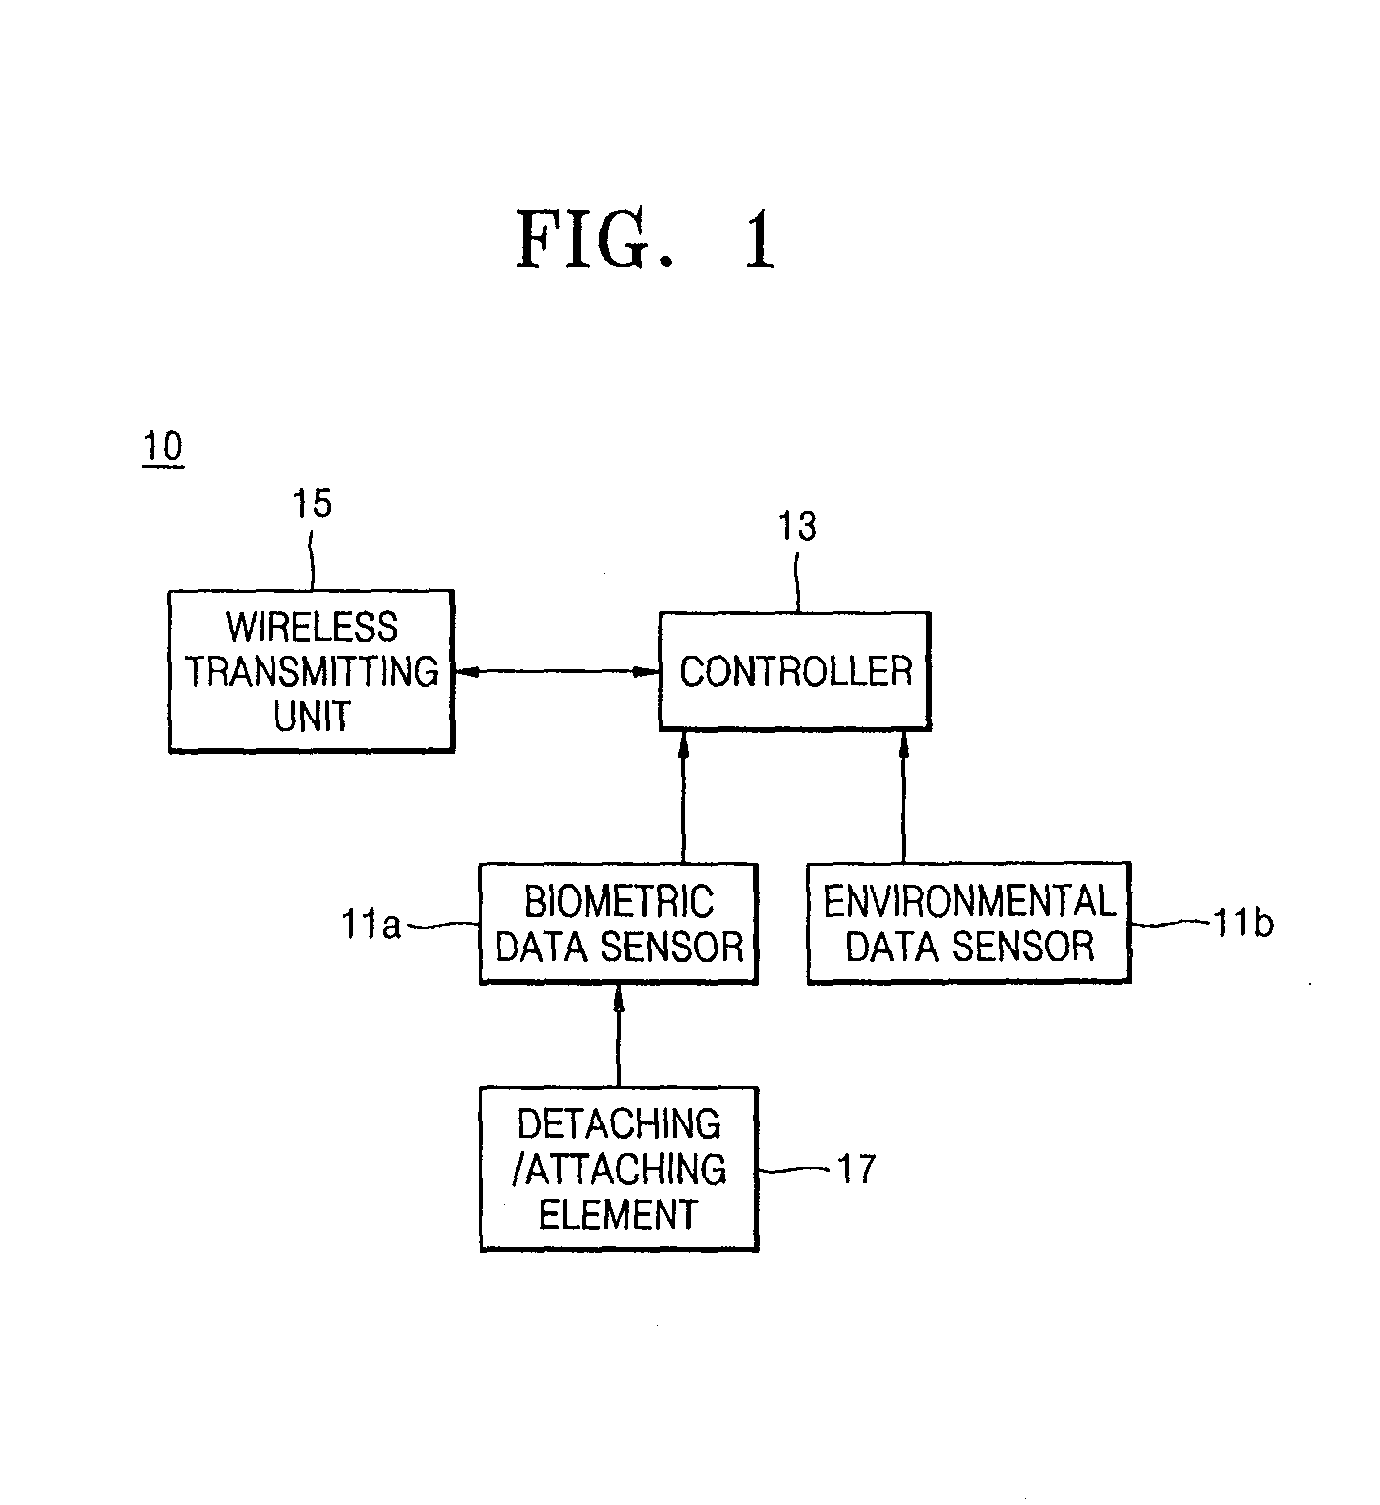 Portable data transmitting device, and system and method for managing heat stress using the same